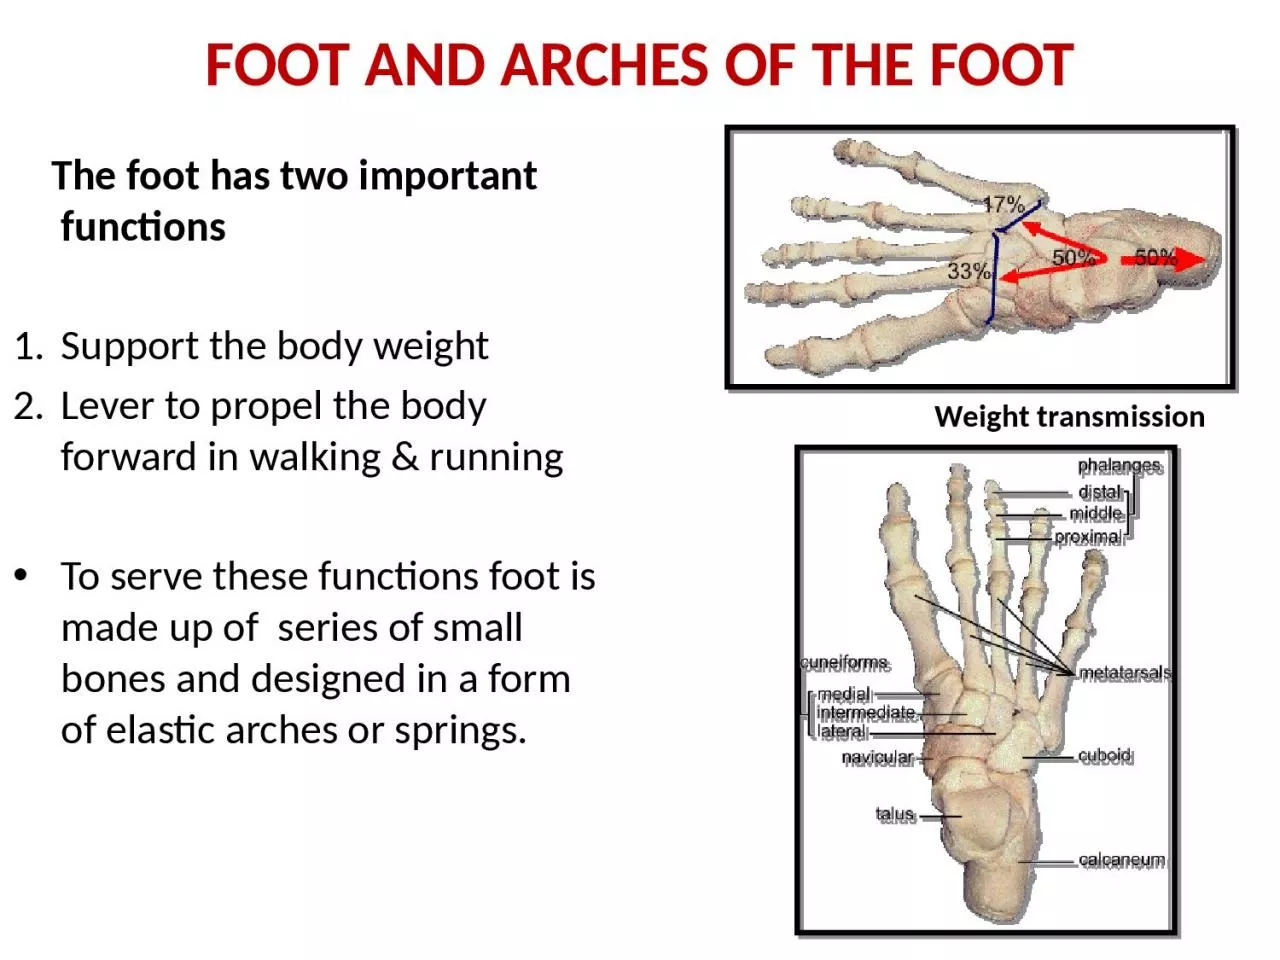 FOOT AND ARCHES OF THE FOOT